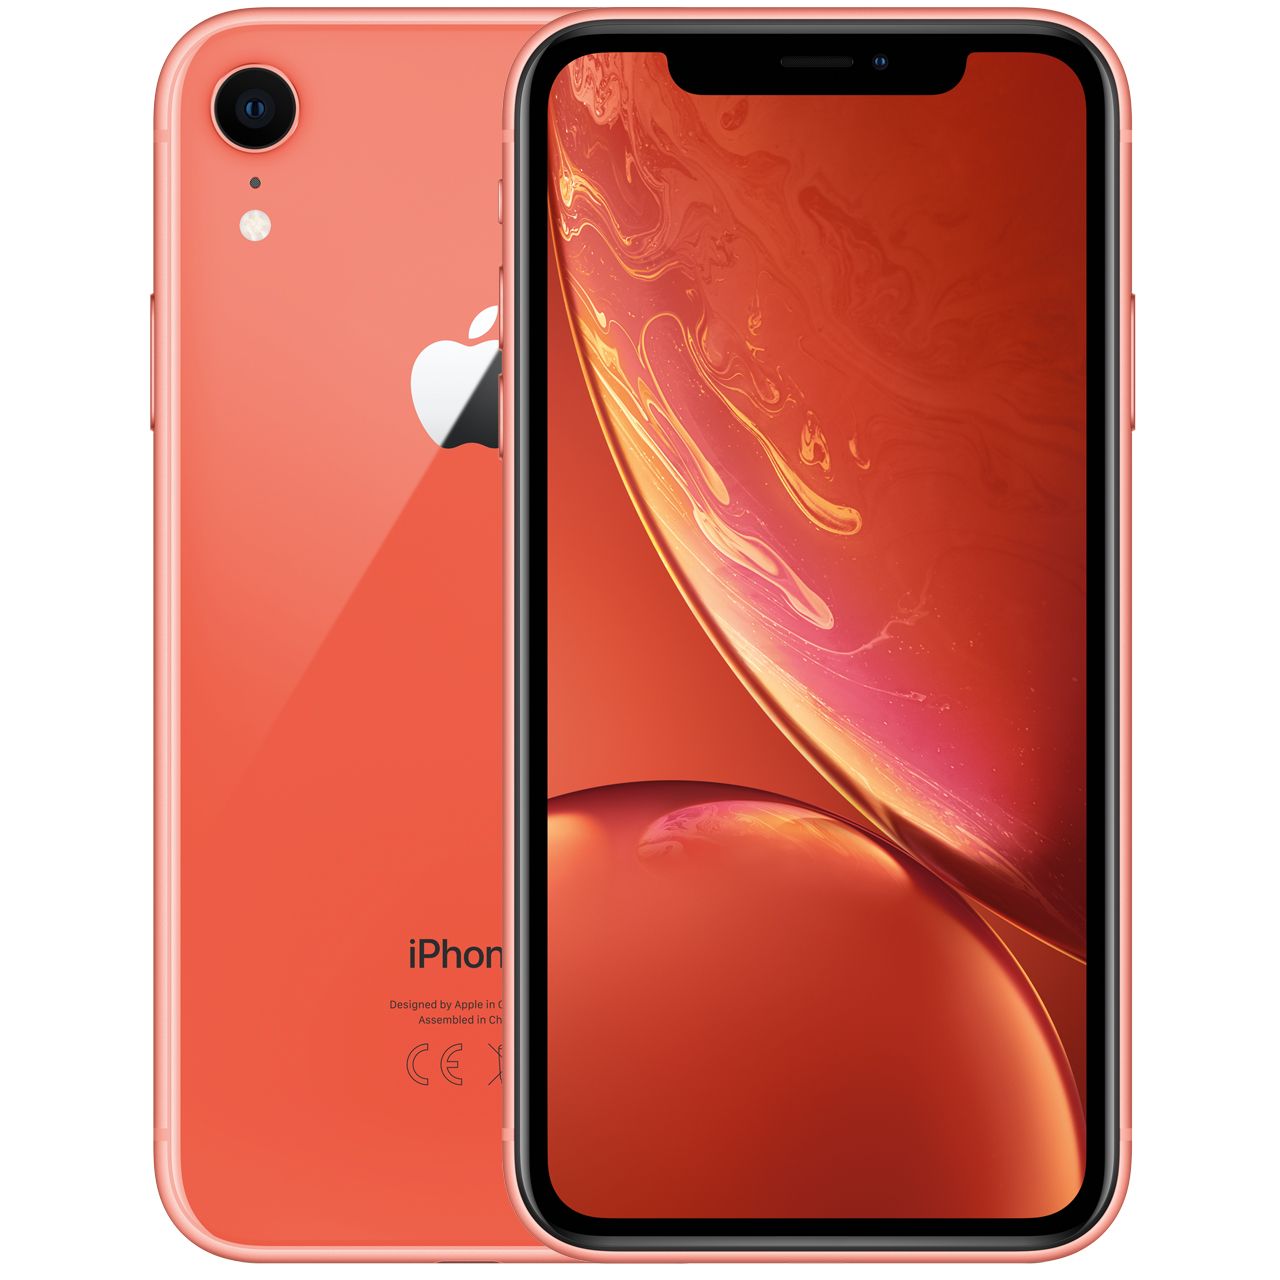 Apple iPhone XR 128GB in Coral Review